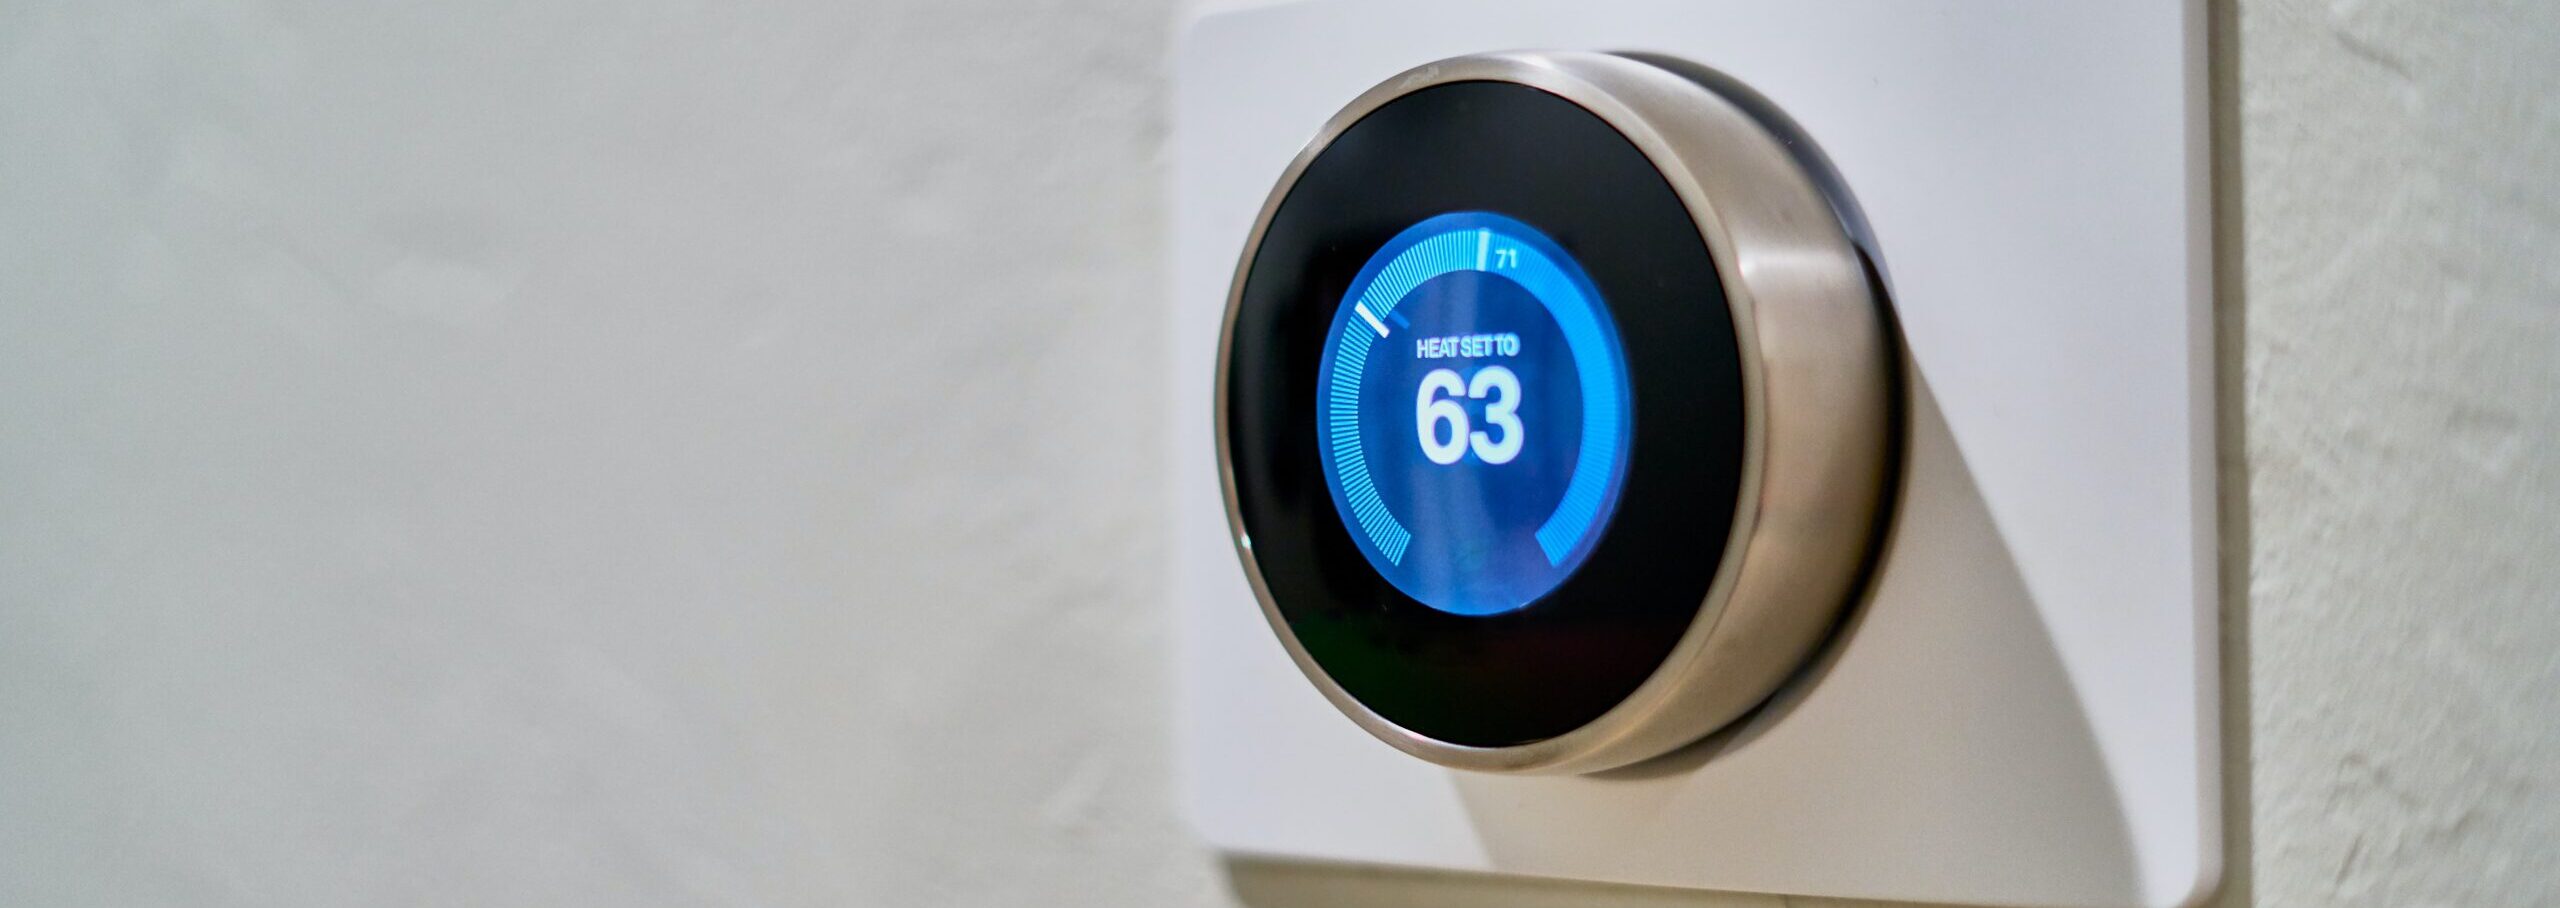 programmable thermostat smart home